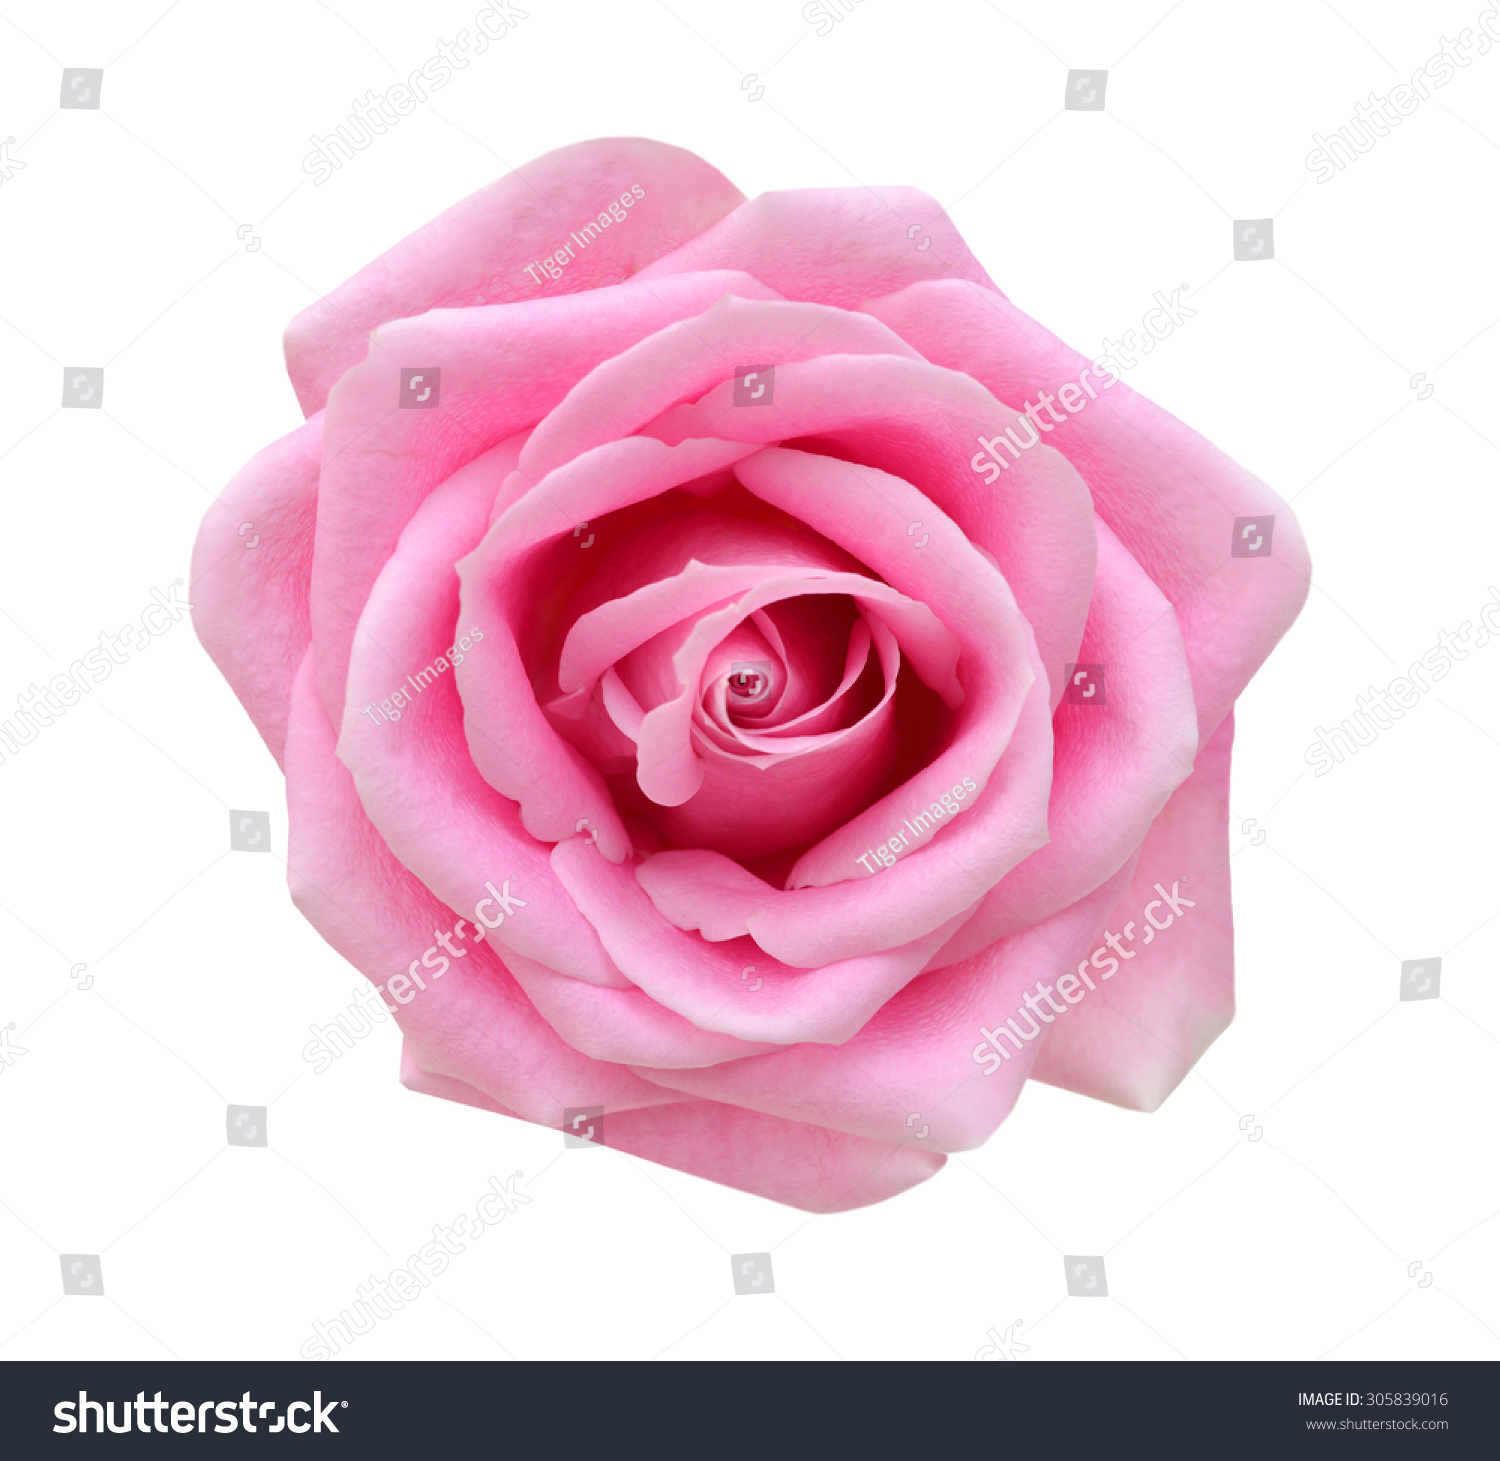 Pink rose isolated on white background. Deep focus. #305839016